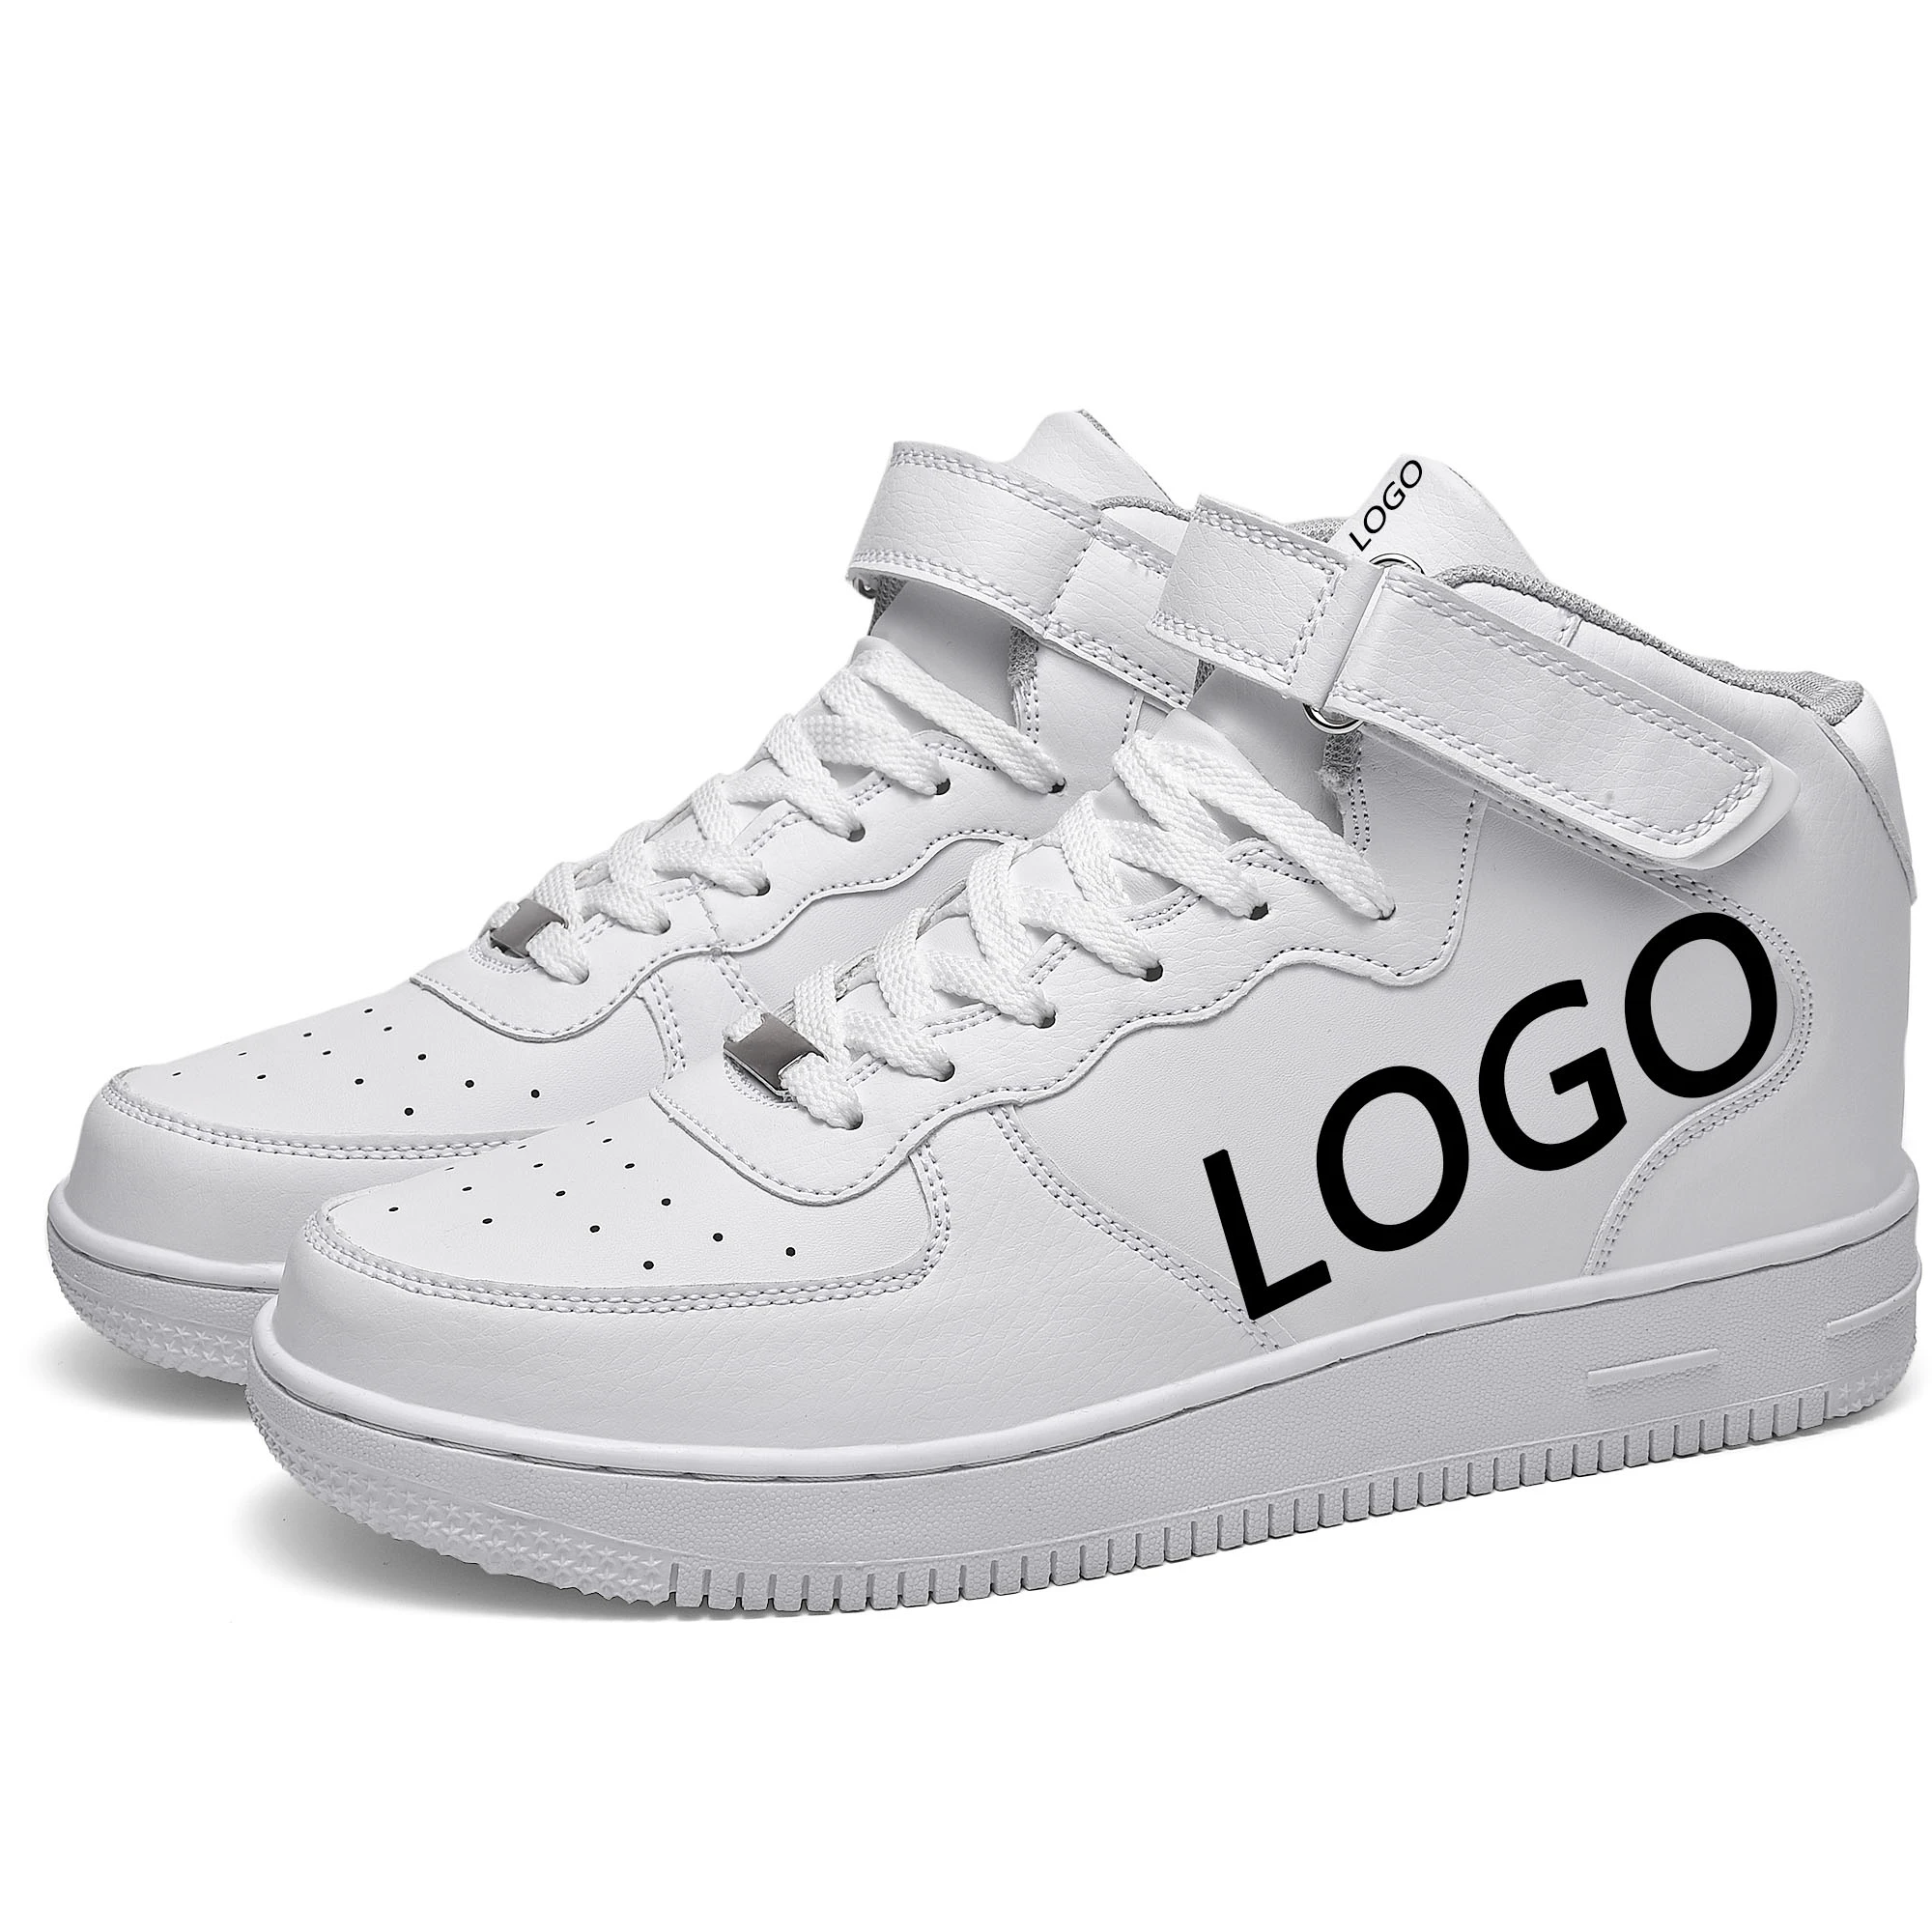 

Skateboard Hot AF1 Unisex White Black Sneaker Air Brand Force One Women Men Mid High Top Shoes Custom Logo Air 1 Force One Shoes